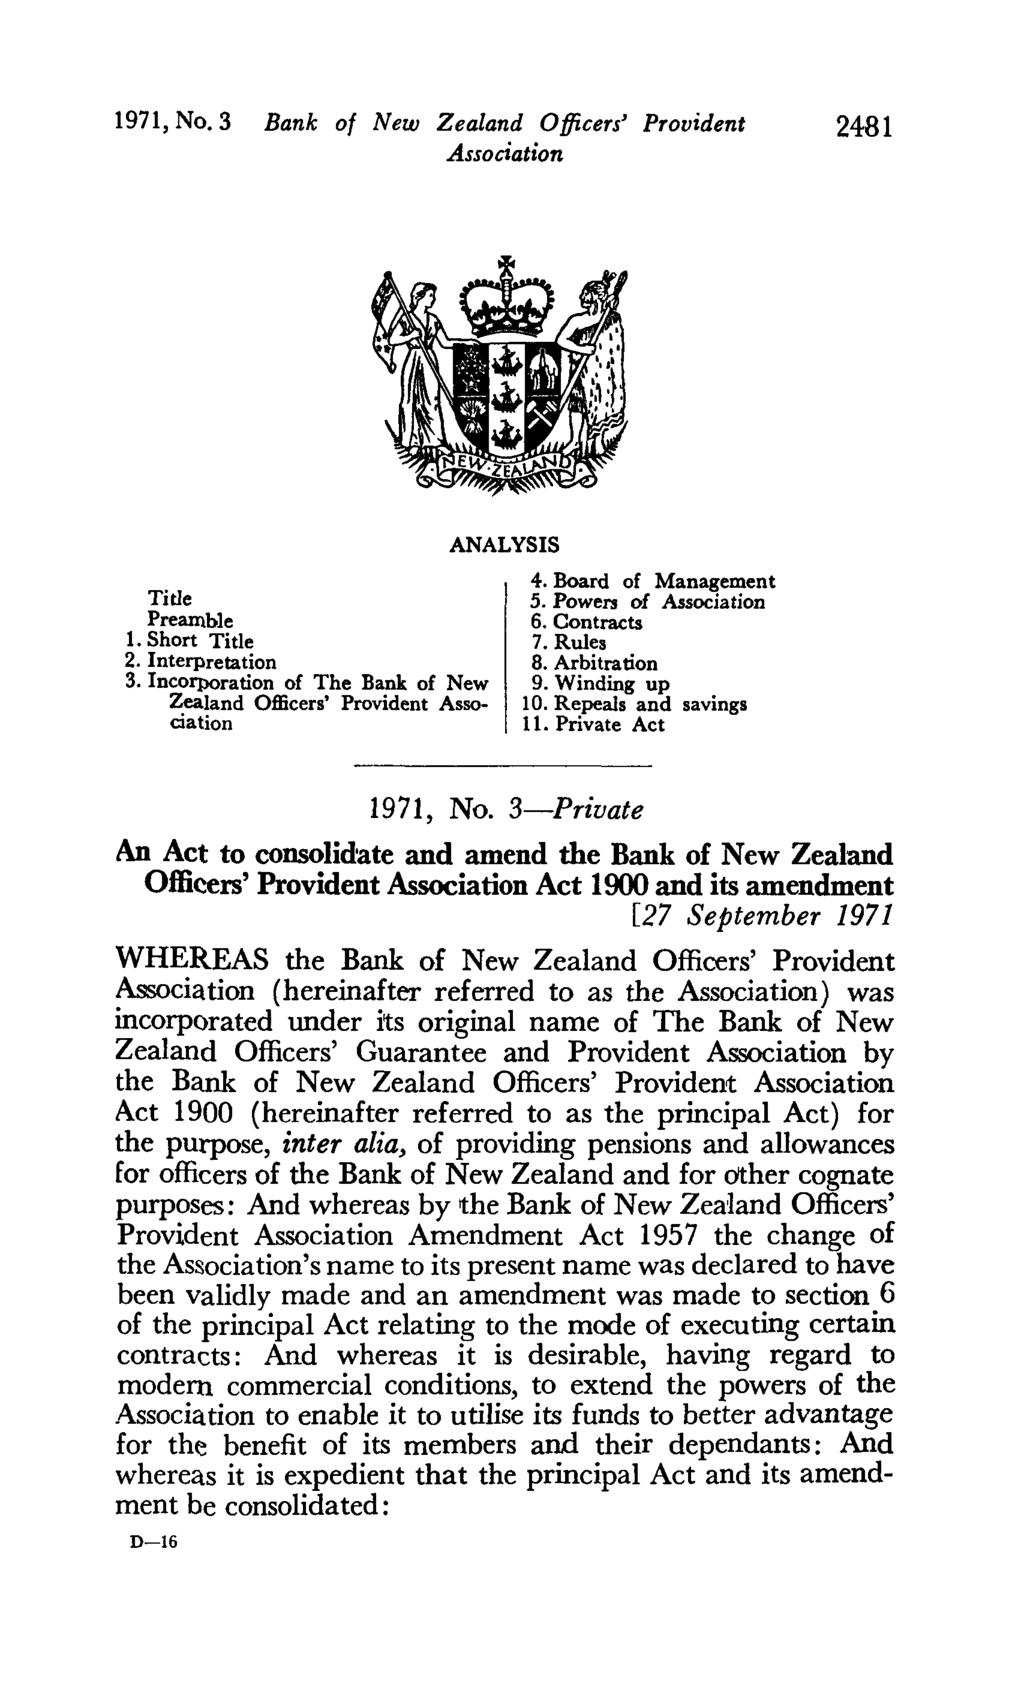 1971, No. 3 Bank of New Zealand Officers' Provident 2481 Title Preamble 1. Short Title 2. Interpretation 3. Incorporation of The Bank of New Zealand Officers' Provident ANALYSIS 4.